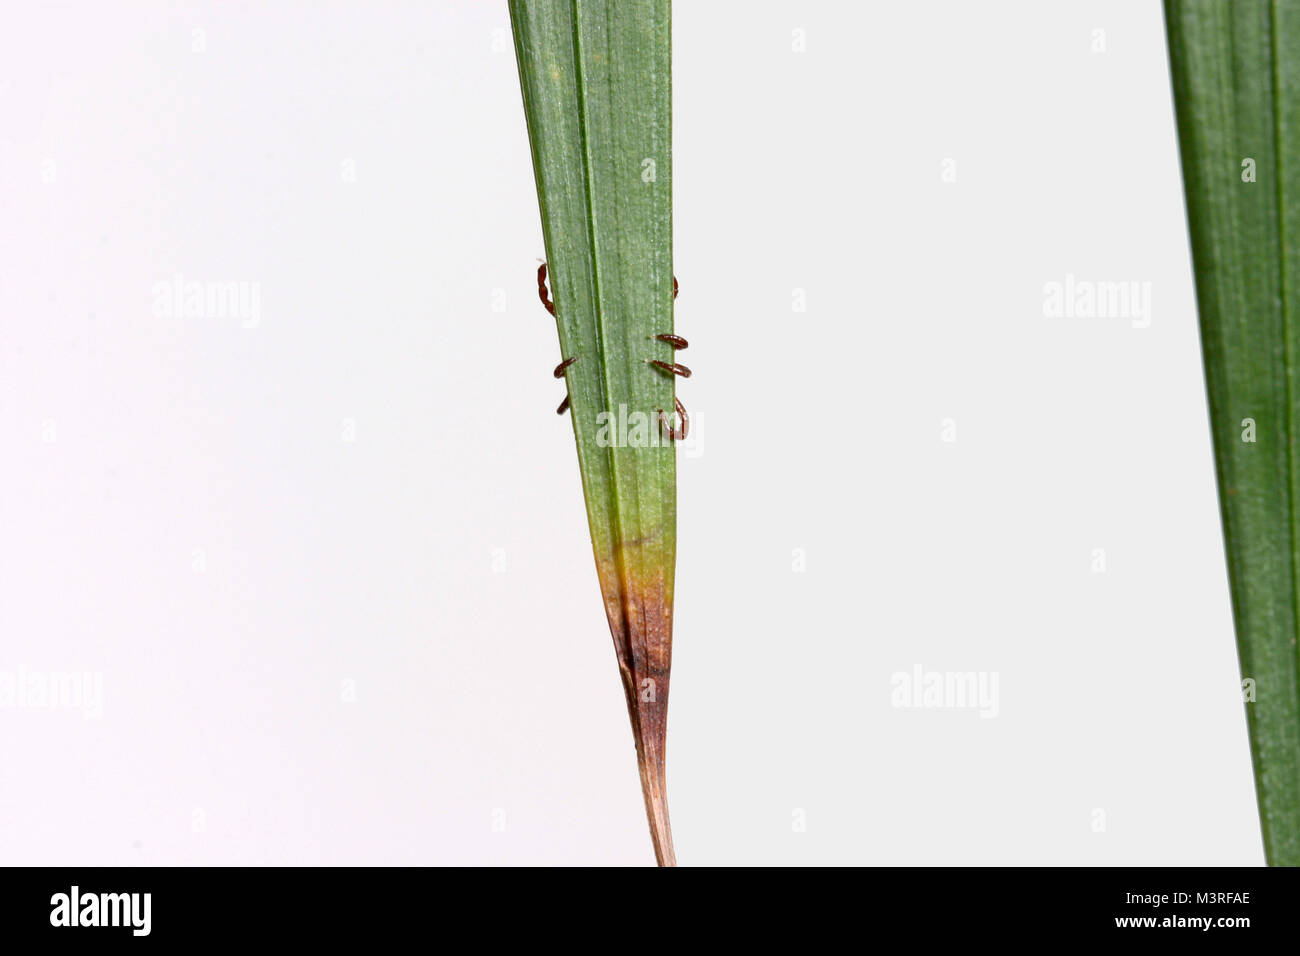 Legs of a Dermacentor variabilis clinging to a plant leaf, also known as the American Dog Tick - This species of tick is known to carry bacteria respo Stock Photo